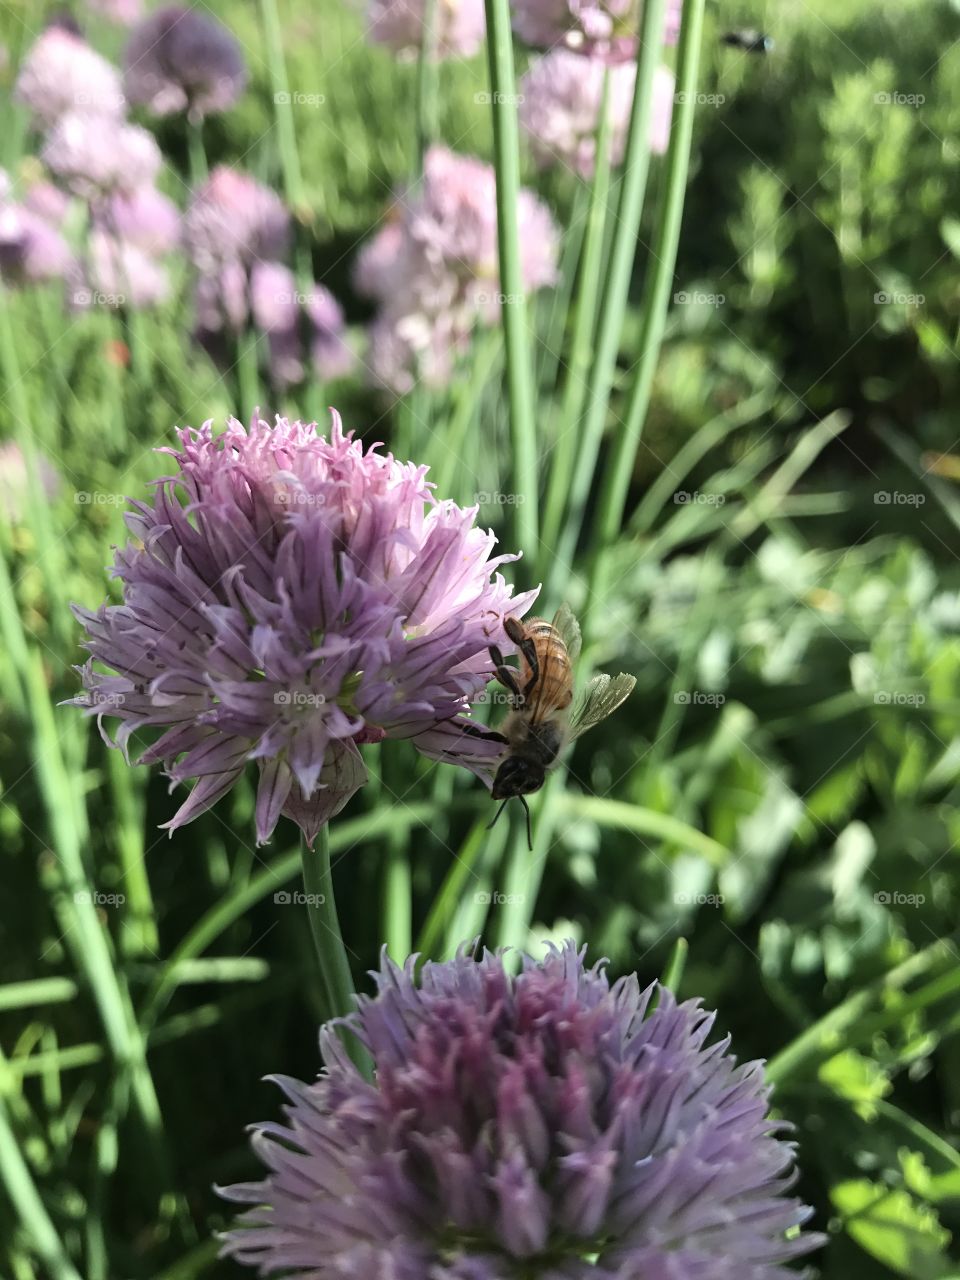 Bee on blooming chive plant